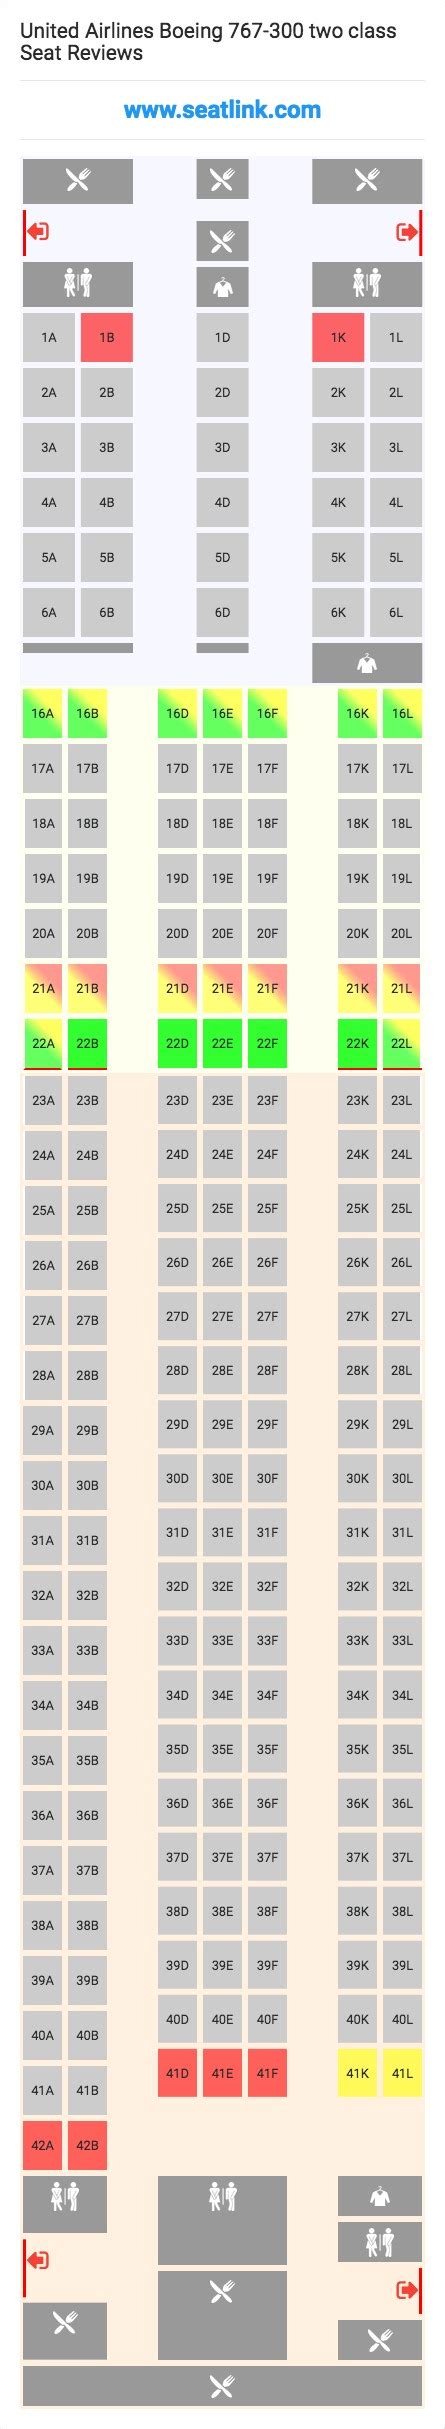 United Airlines Boeing 767 300 Two Class Seating Chart Updated July